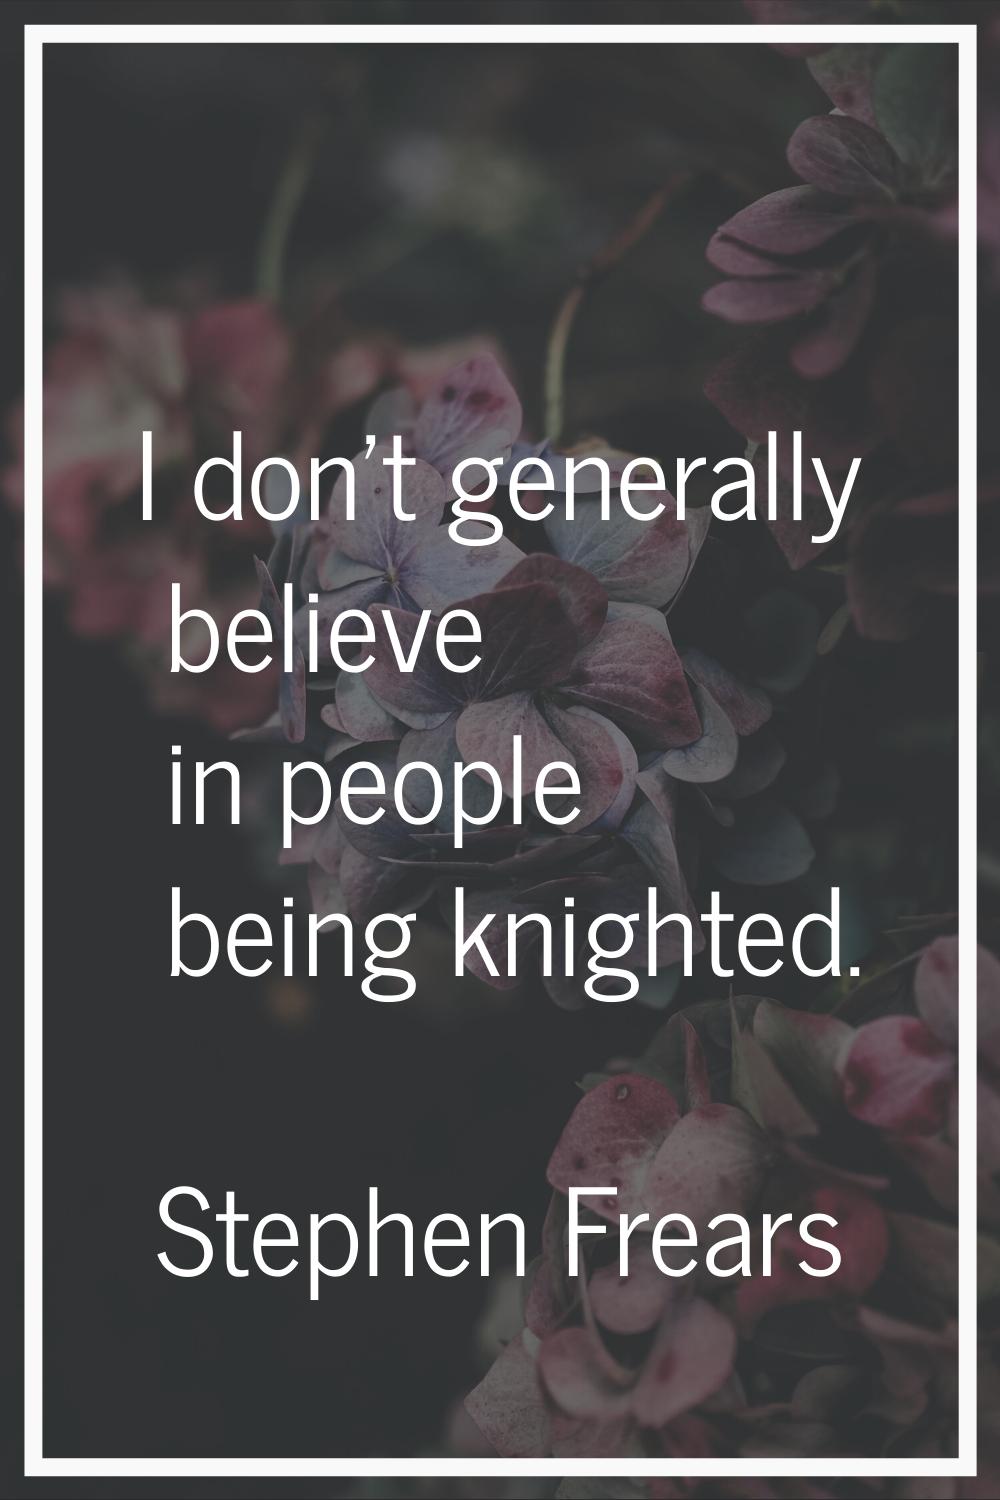 I don't generally believe in people being knighted.